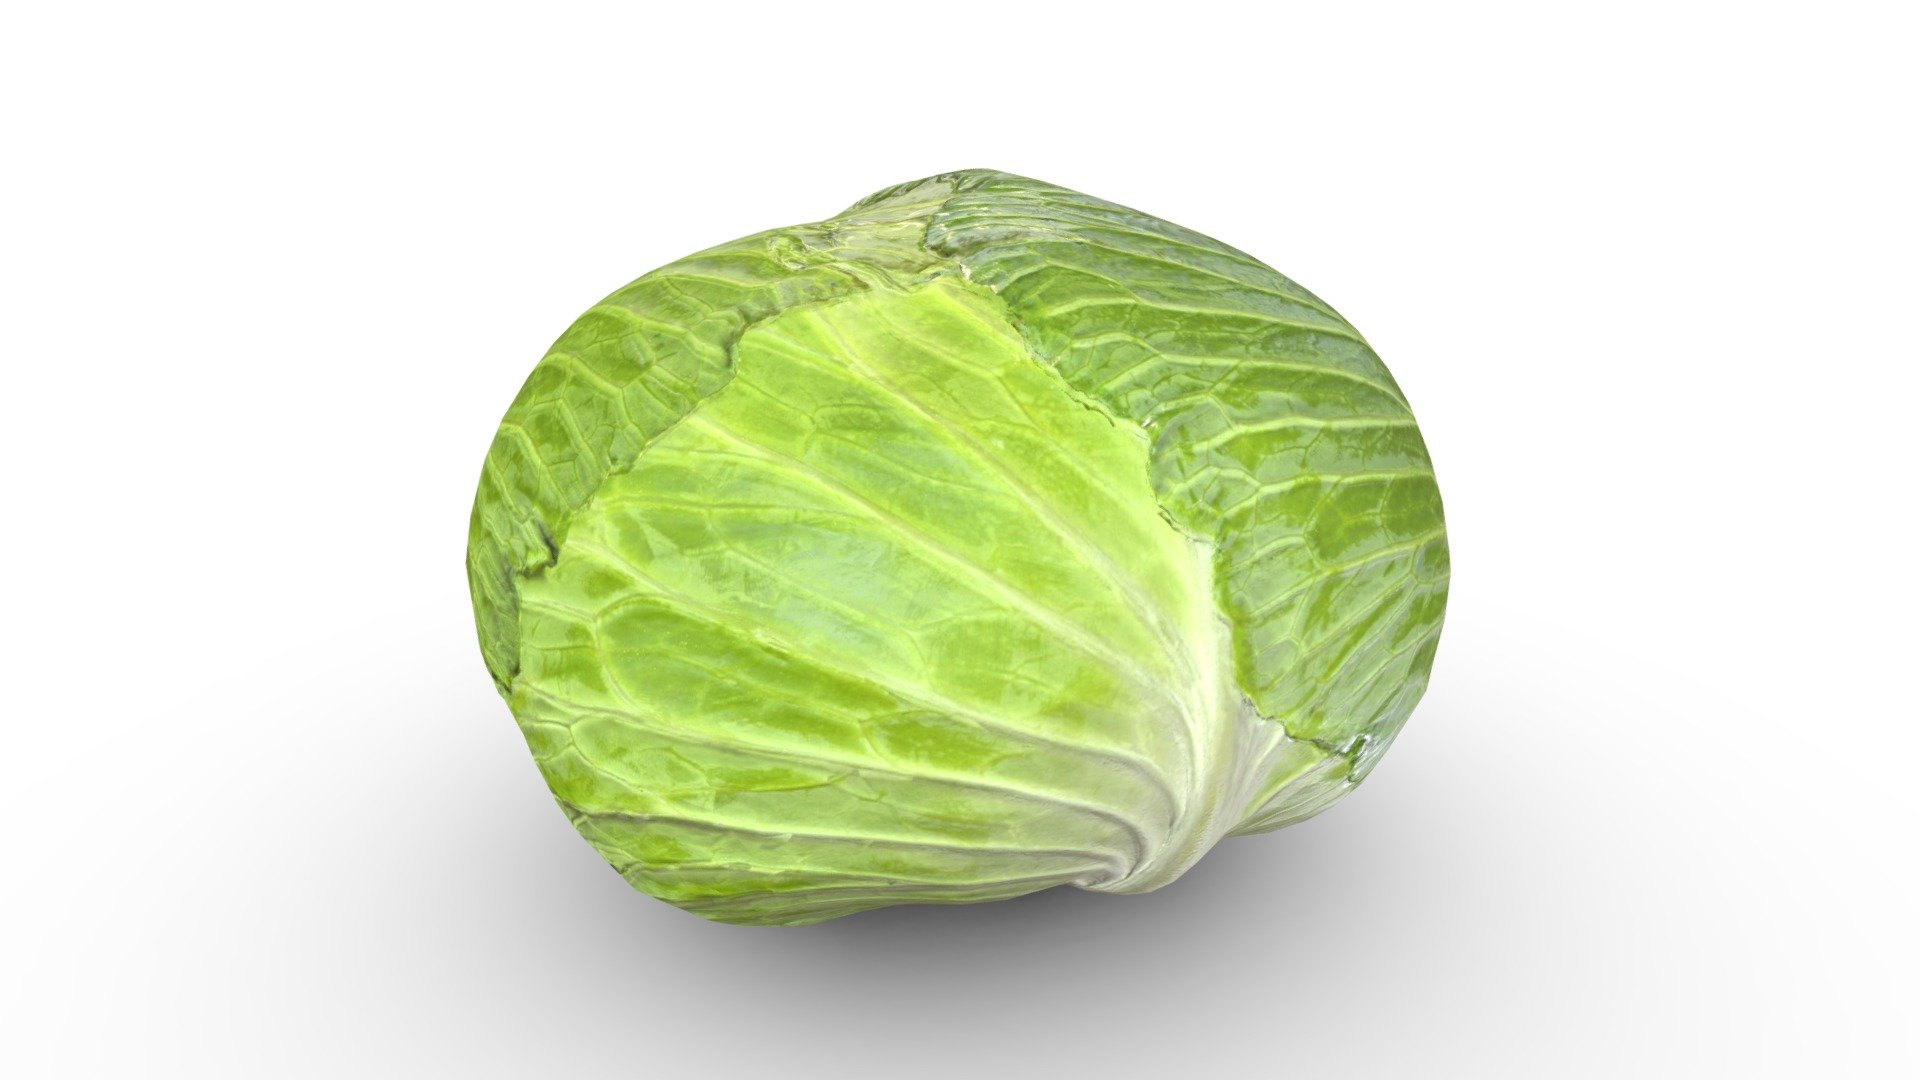 Support the Free 3D Model Library for only $1 per month: https://www.patreon.com/meerdigital

Enhance your projects with this premium model of a cabbage. This model has a very lean polygon count at 1,536, making it perfect for real-time applications or quick render times in ray tracing engines. The geometry comprising this model has been whittled down to the absolute bare minimum possible while still retaining most of its visual quality.

Features:




1,536 polygons quads / 3,072 when triangulated

All quad geometry, no tris or n-gons

2048px by 2048px textures for PBR workflows (Albedo/Color, Normal, Roughness &amp; Ambient Occlusion)

Non-overlapping UV Map

World scale set to centimeters

&ldquo;Cabbage